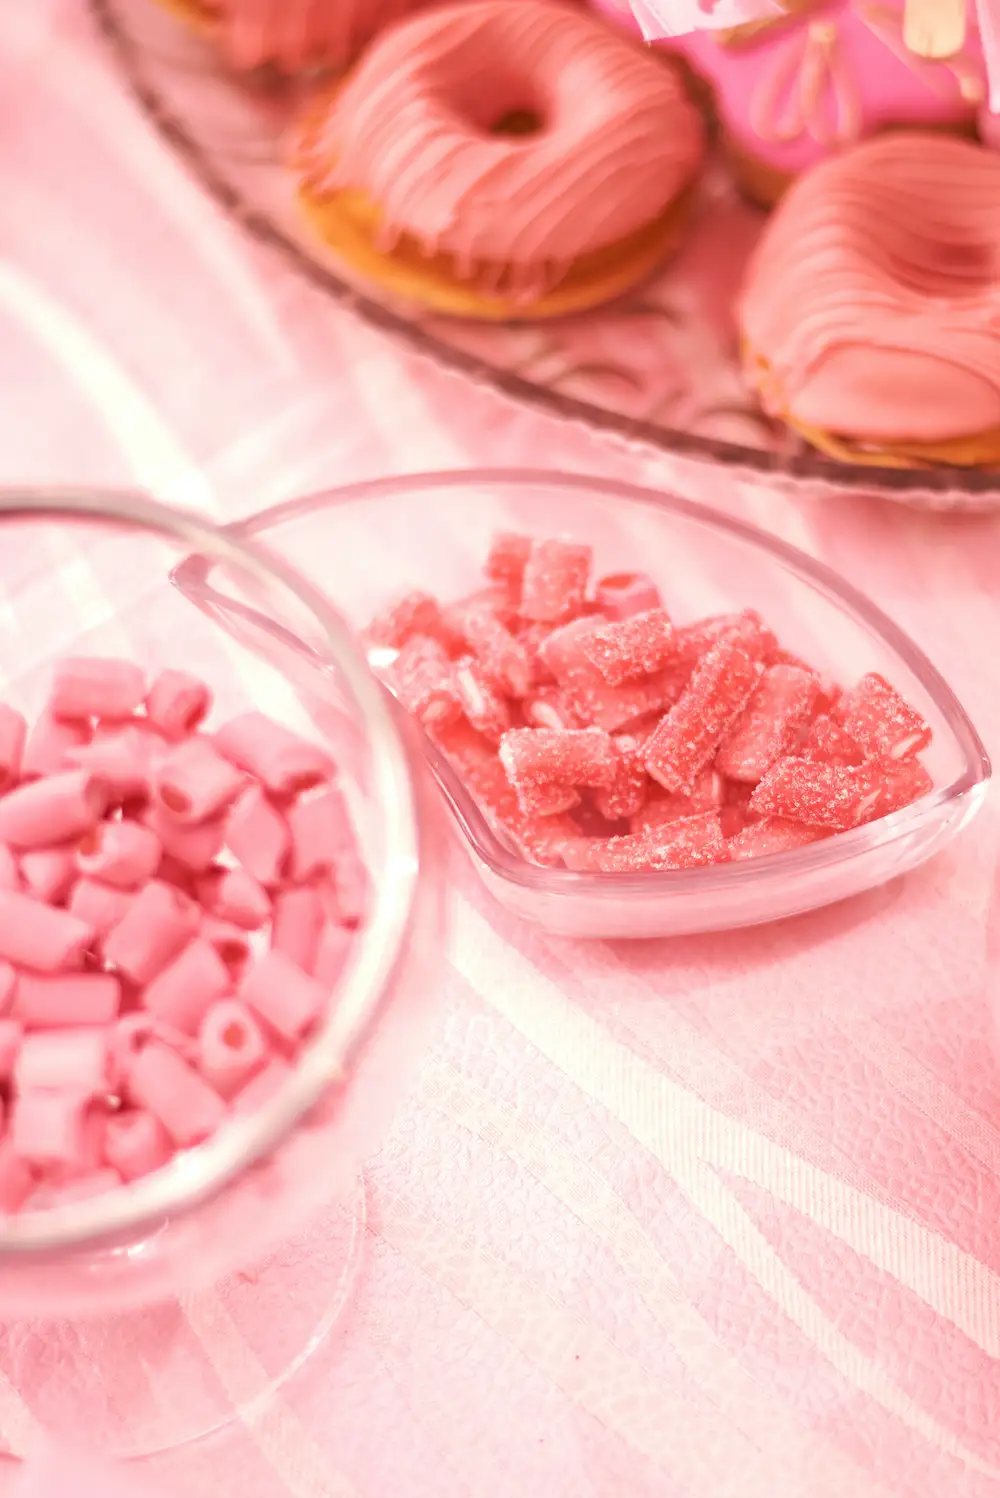 Sugary Sweet Pink Sweets & Candy In A Bowl